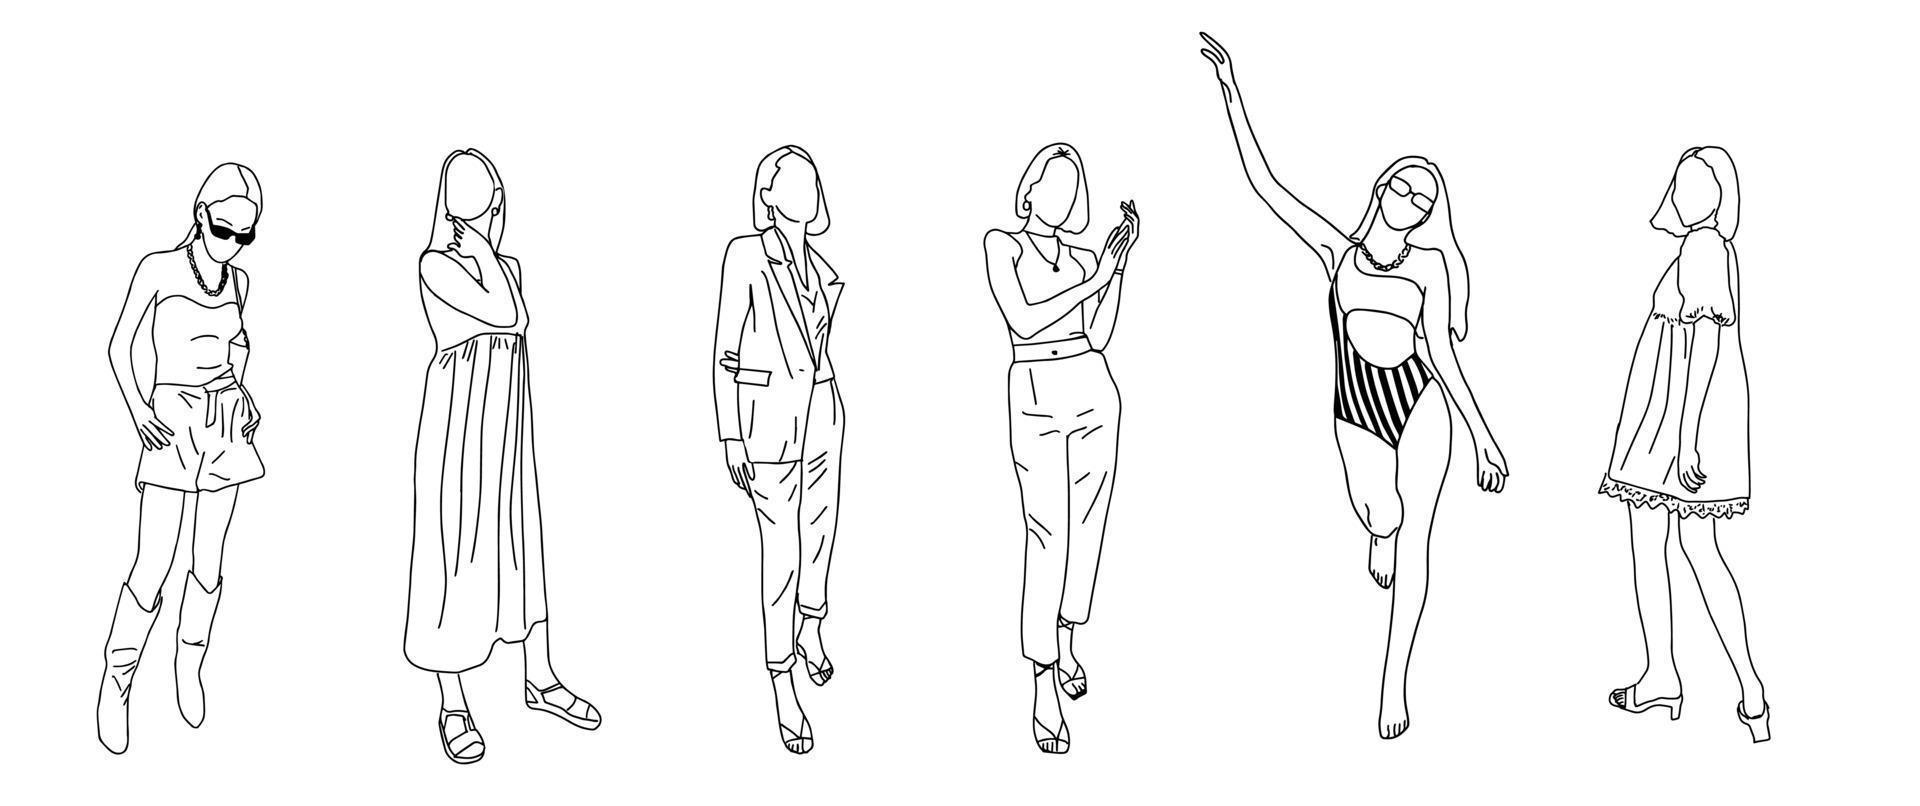 Girls drawn in a linear style for a fashion magazine. Vector illustration.